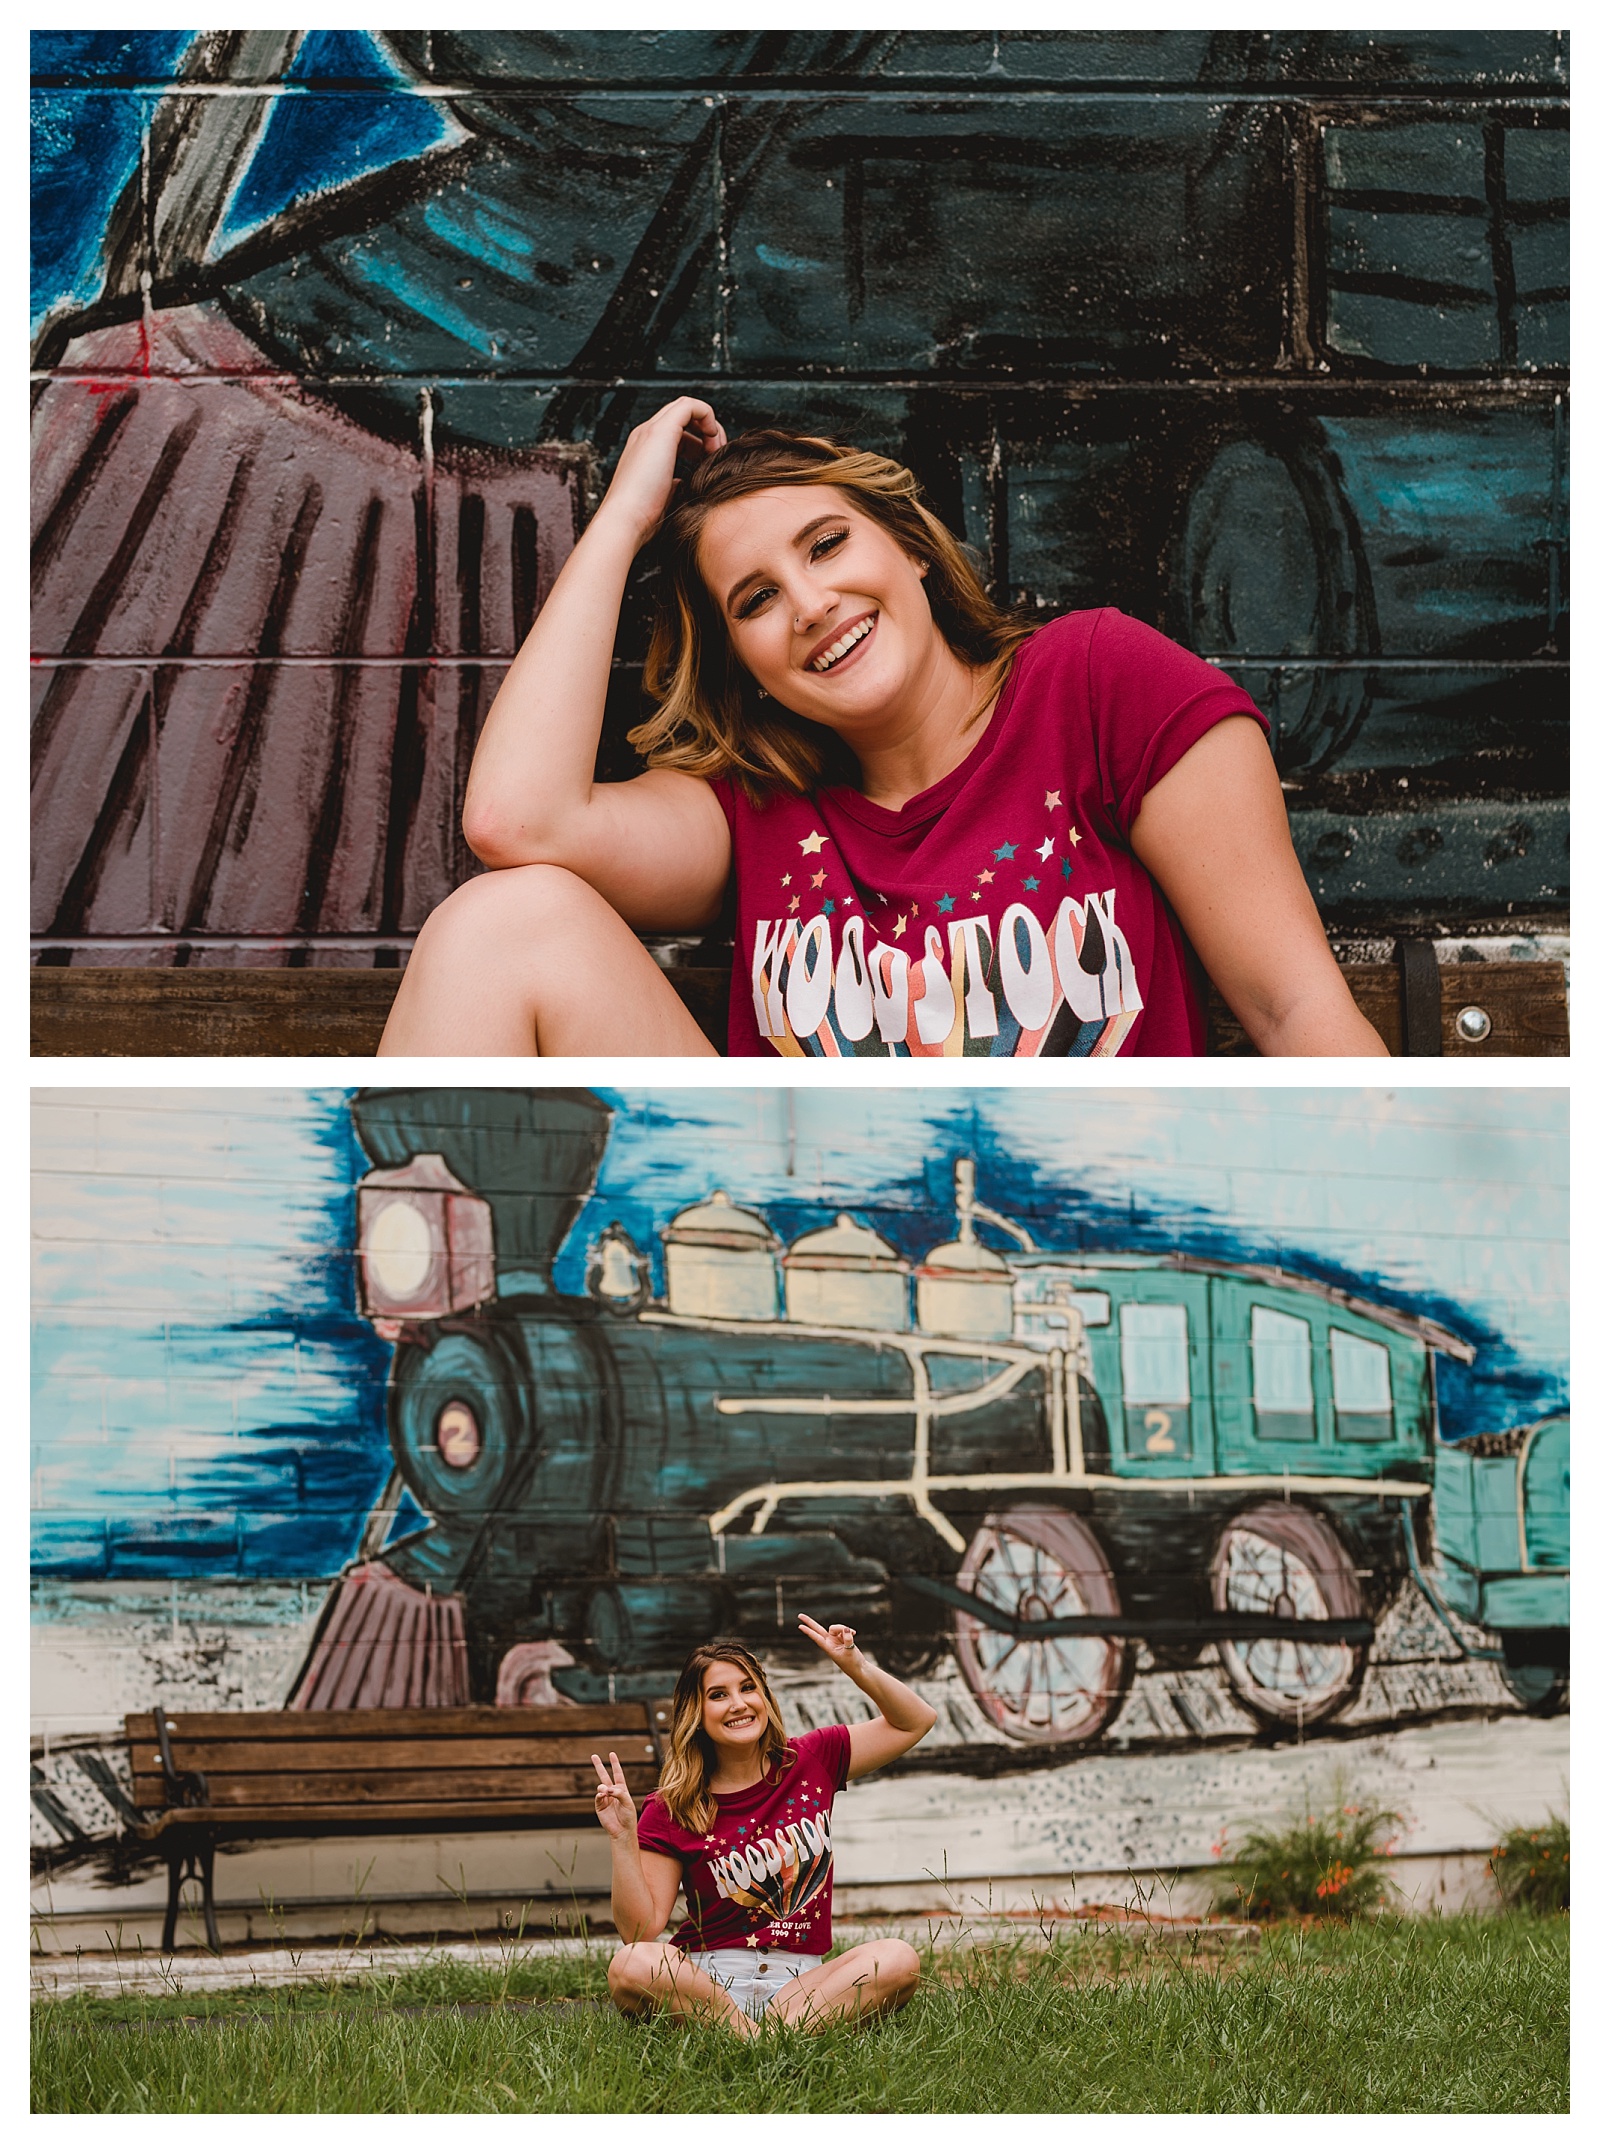 Train mural in Madison Fl used for senior photos. Shelly Williams Photography